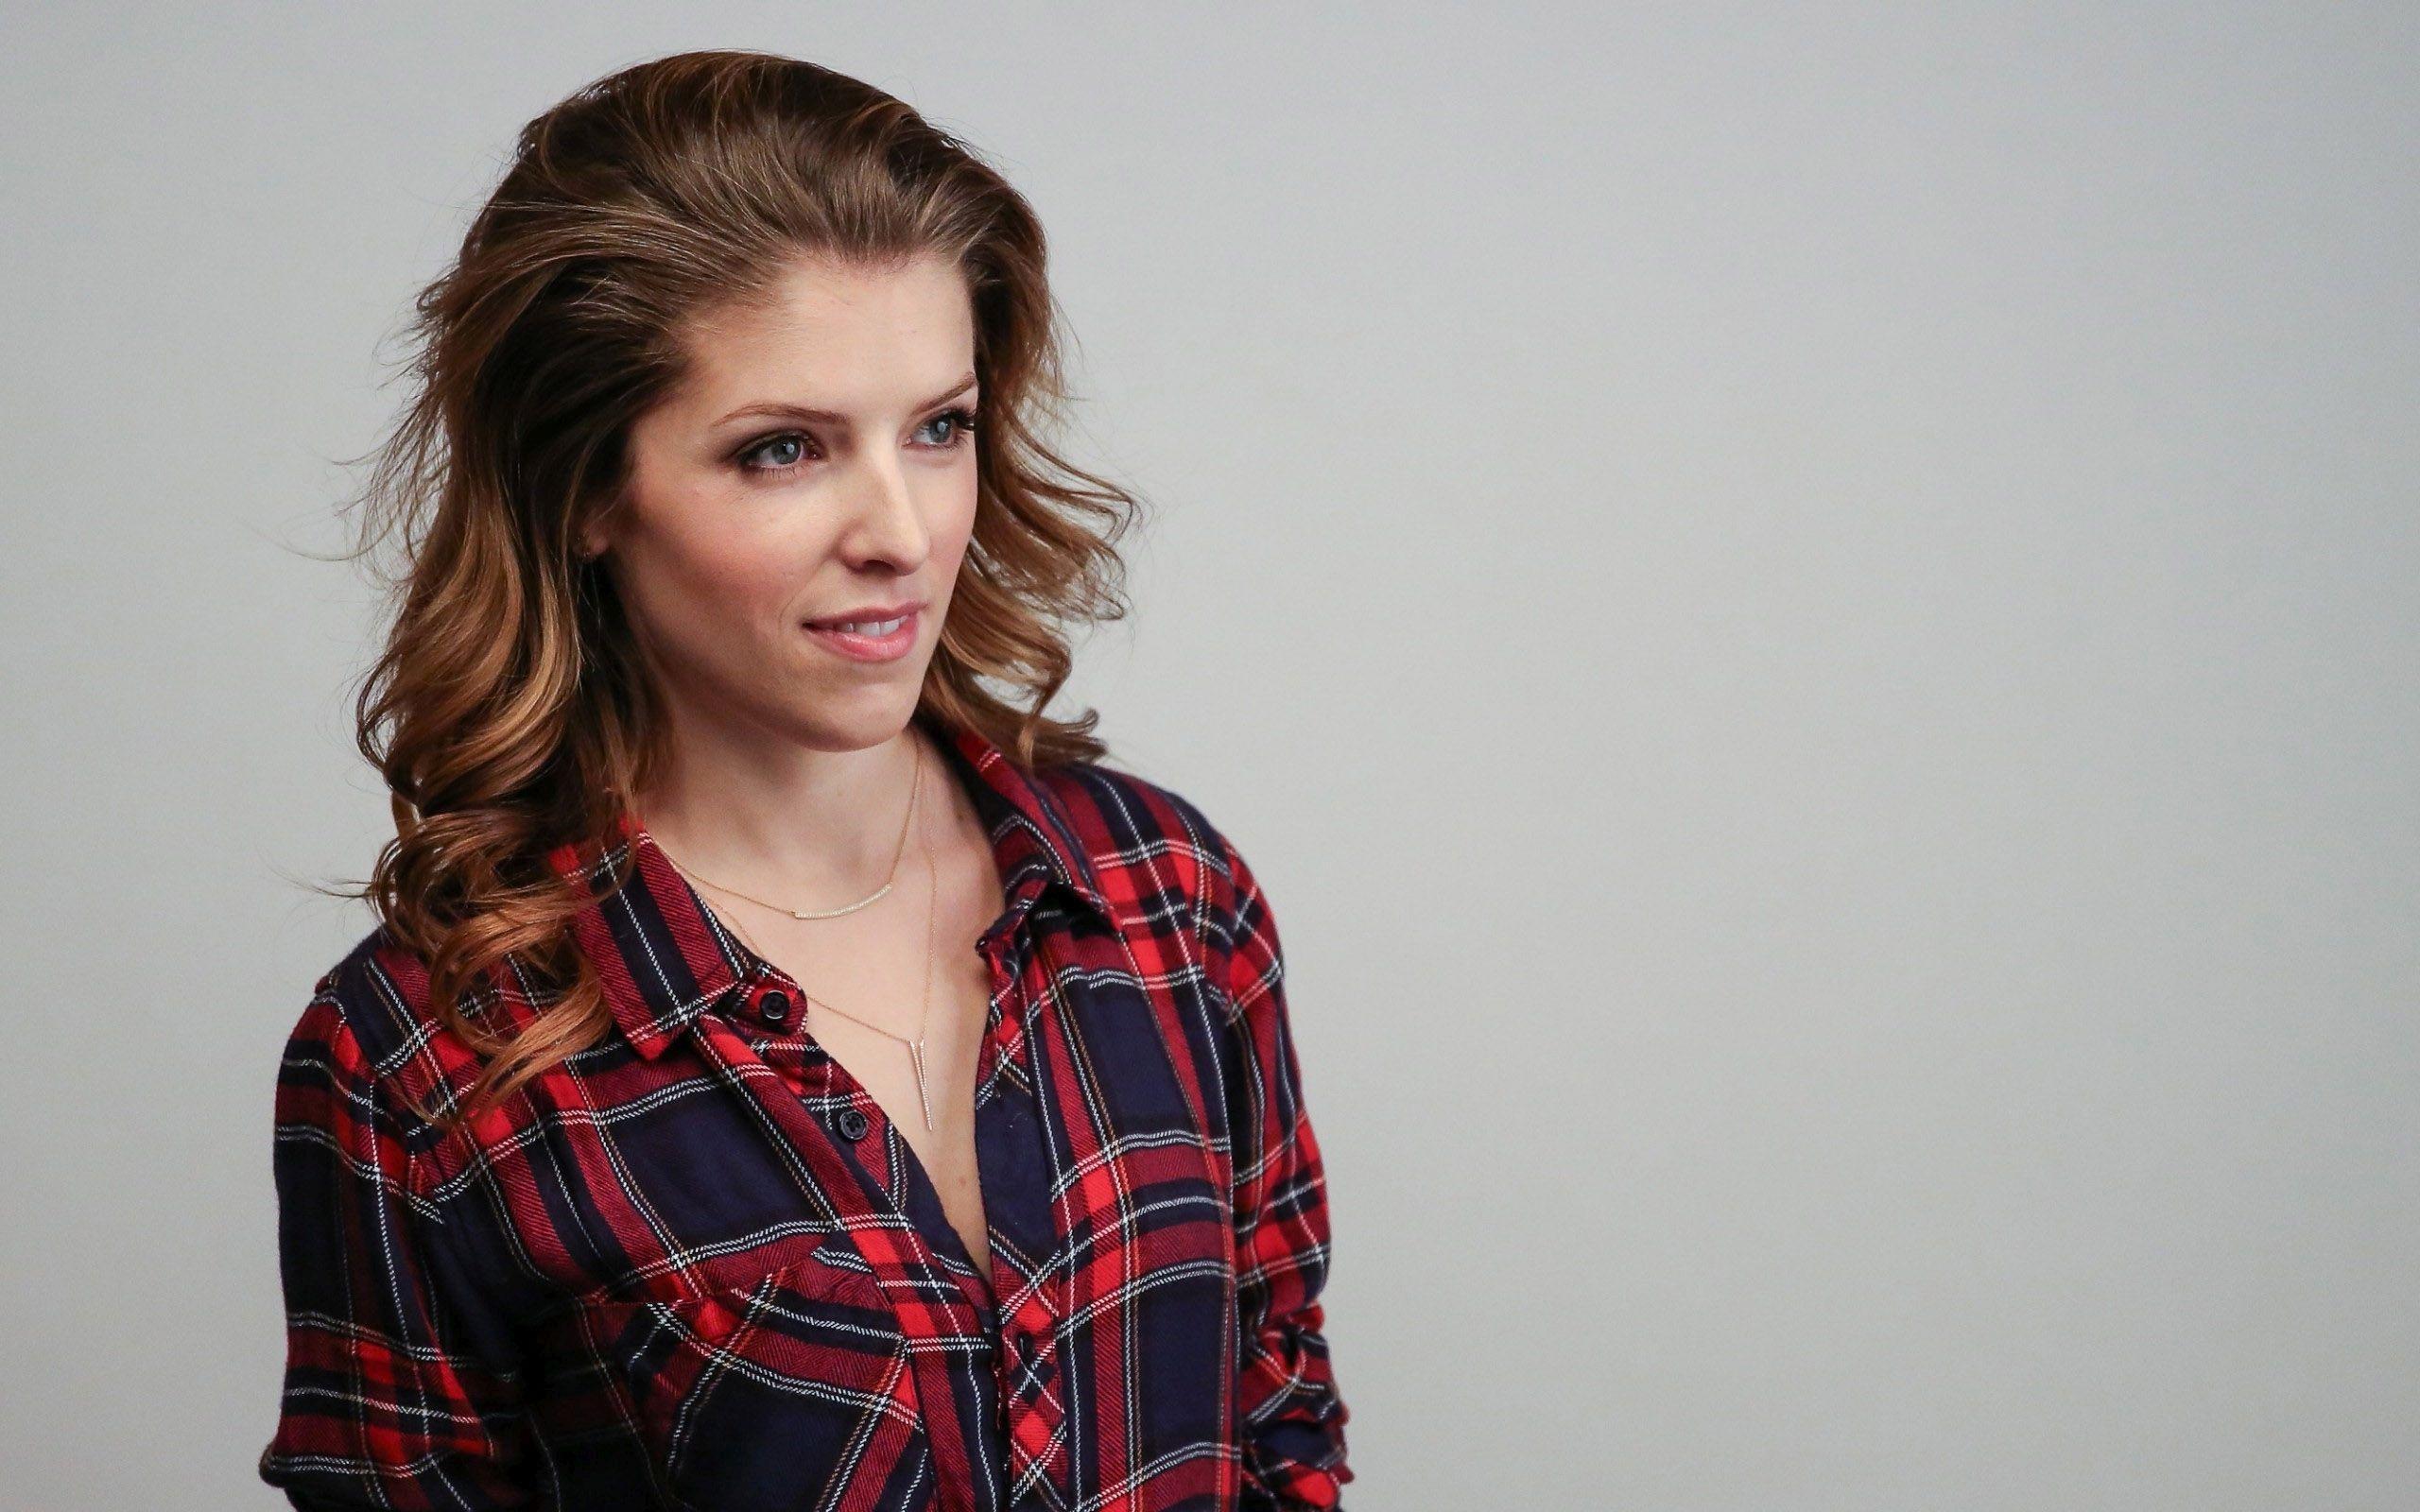 Anna Kendrick Wallpaper High Resolution and Quality Download